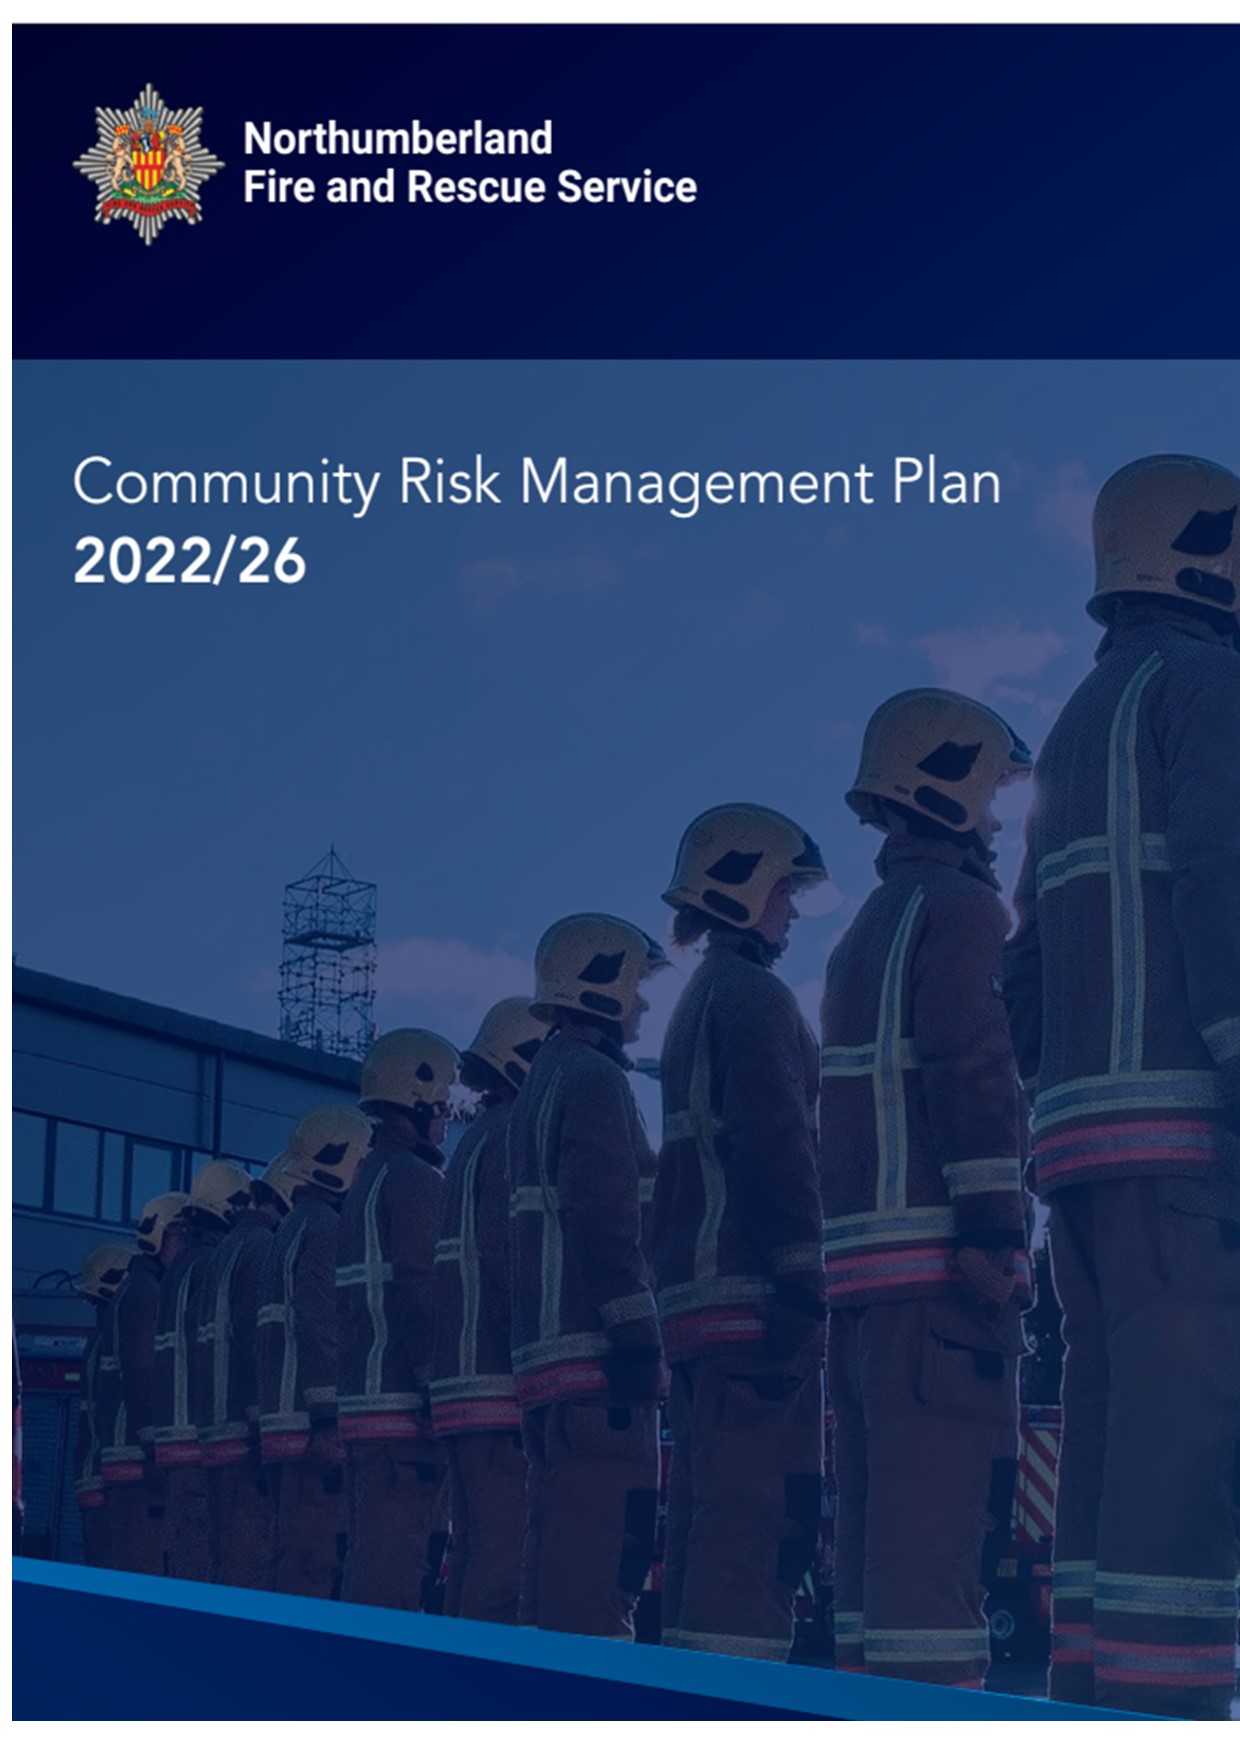 Northumberland Fire & Rescue Service Community Risk Management Plan 2022-2026